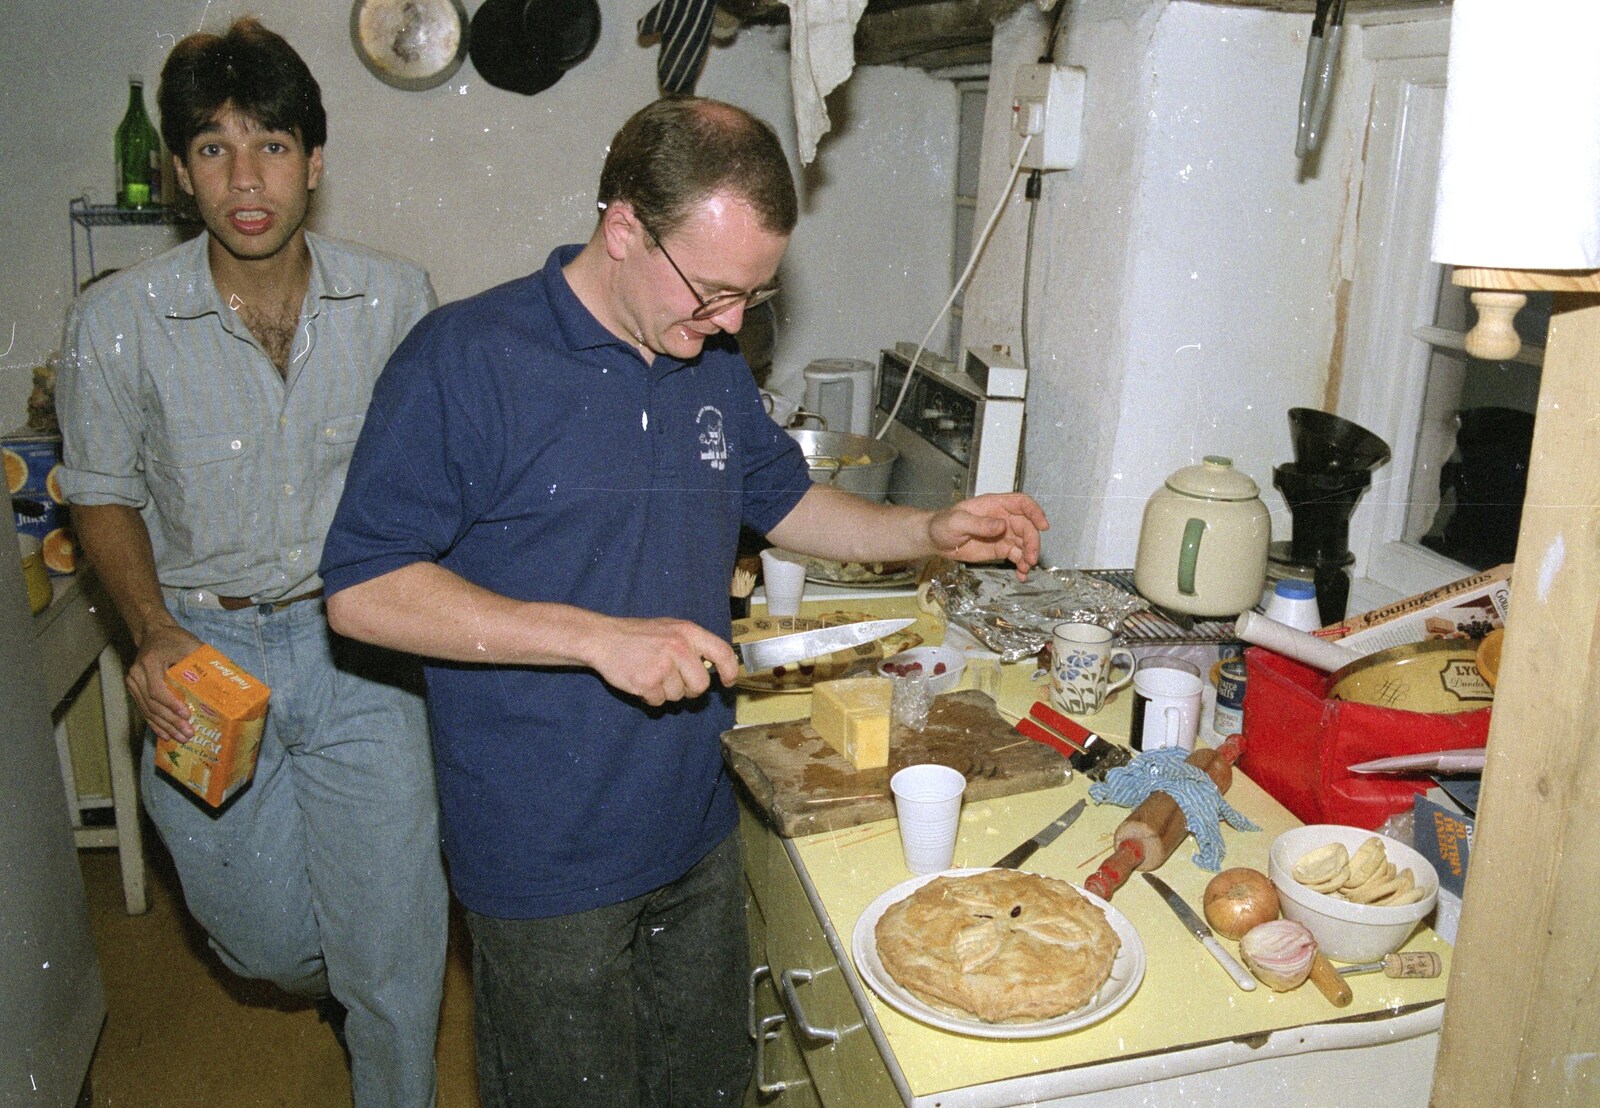 Liz's Party, Abergavenny, Monmouthshire, Wales - 4th August 1990: Hamish chops up some cheese